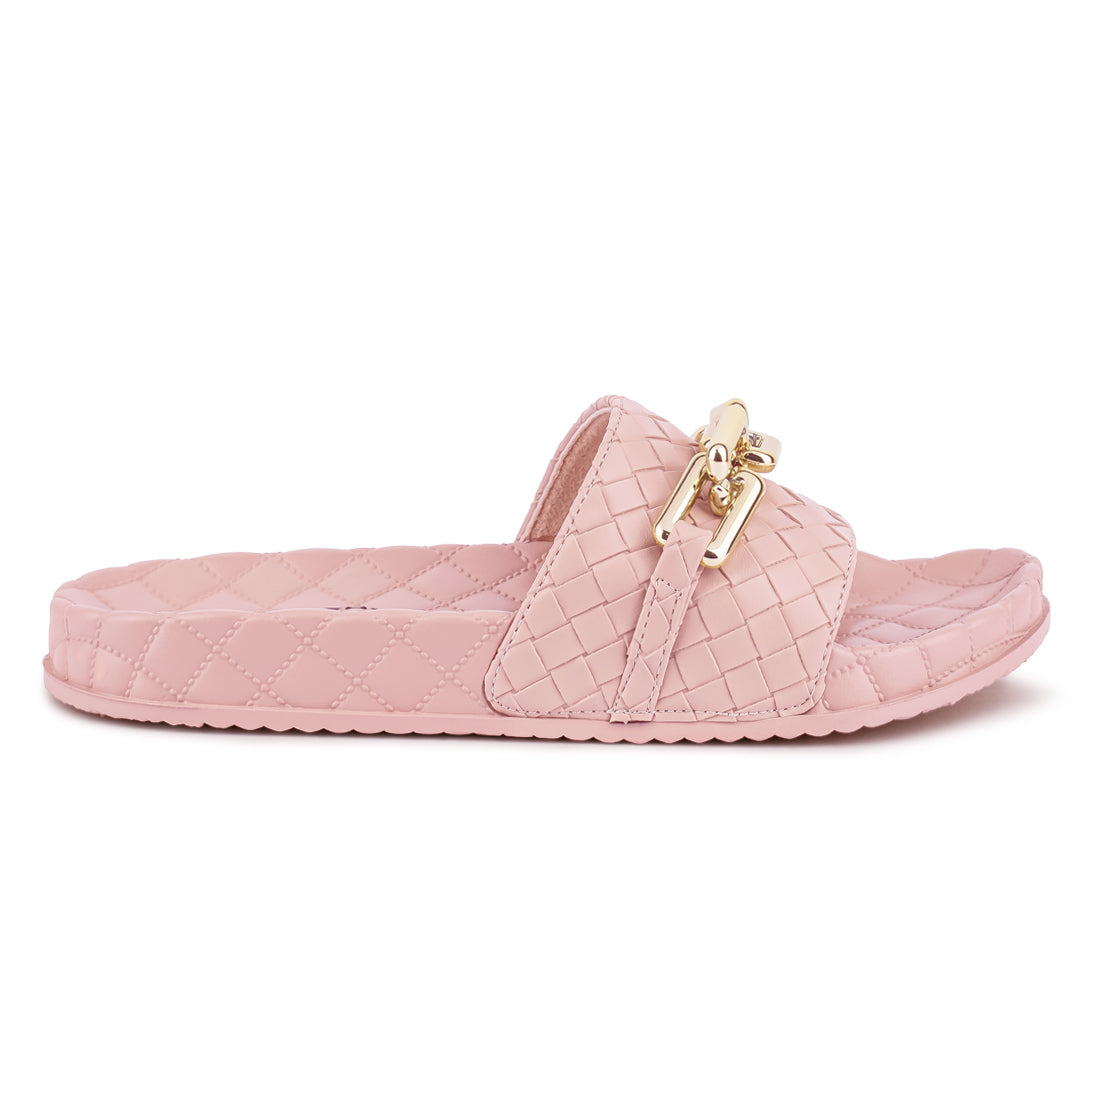 Pink Bling Chain Strap Woven Slip On Flats